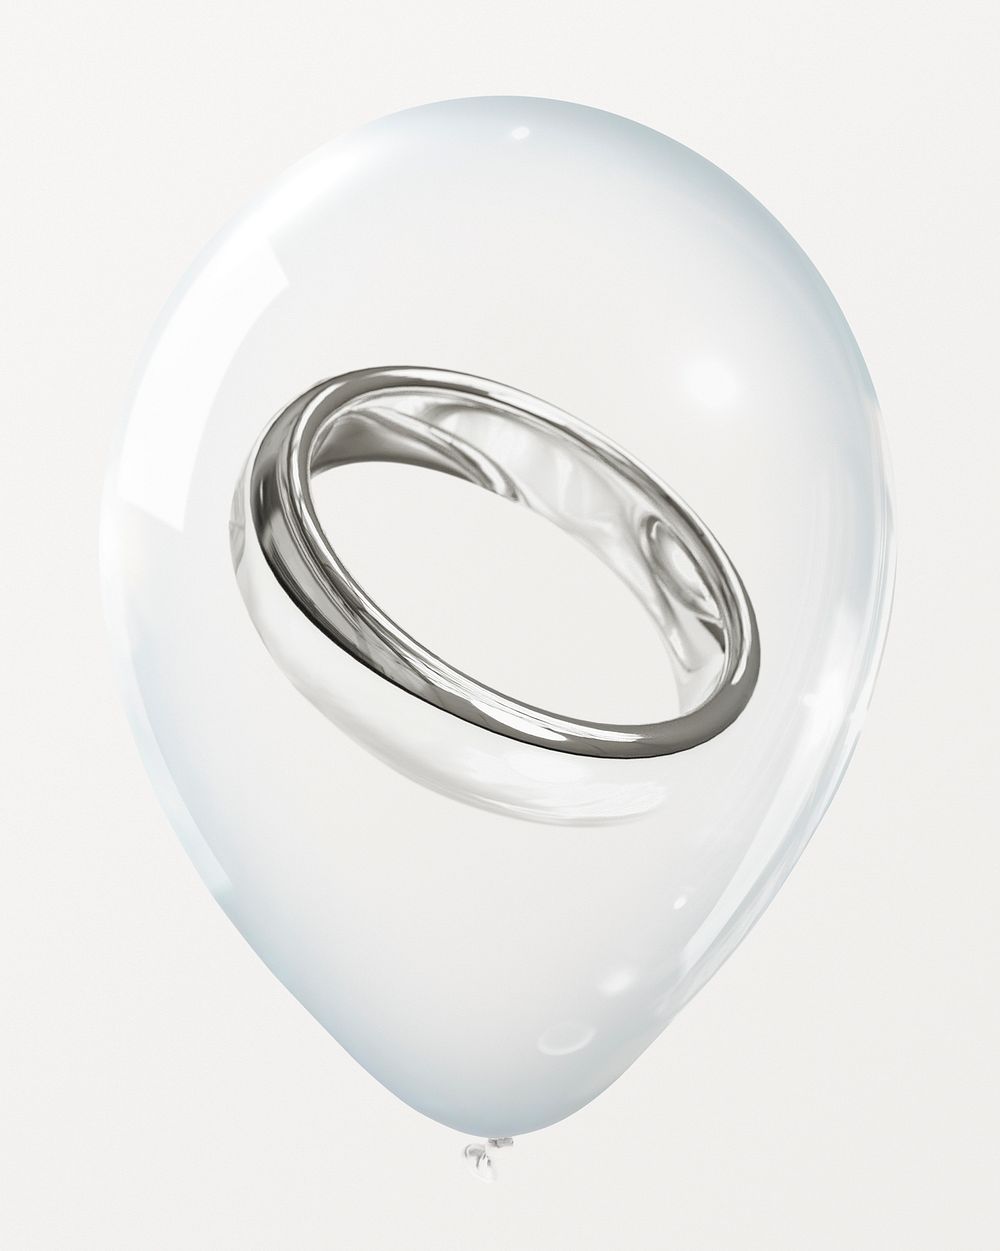 Silver ring in clear balloon, wedding concept